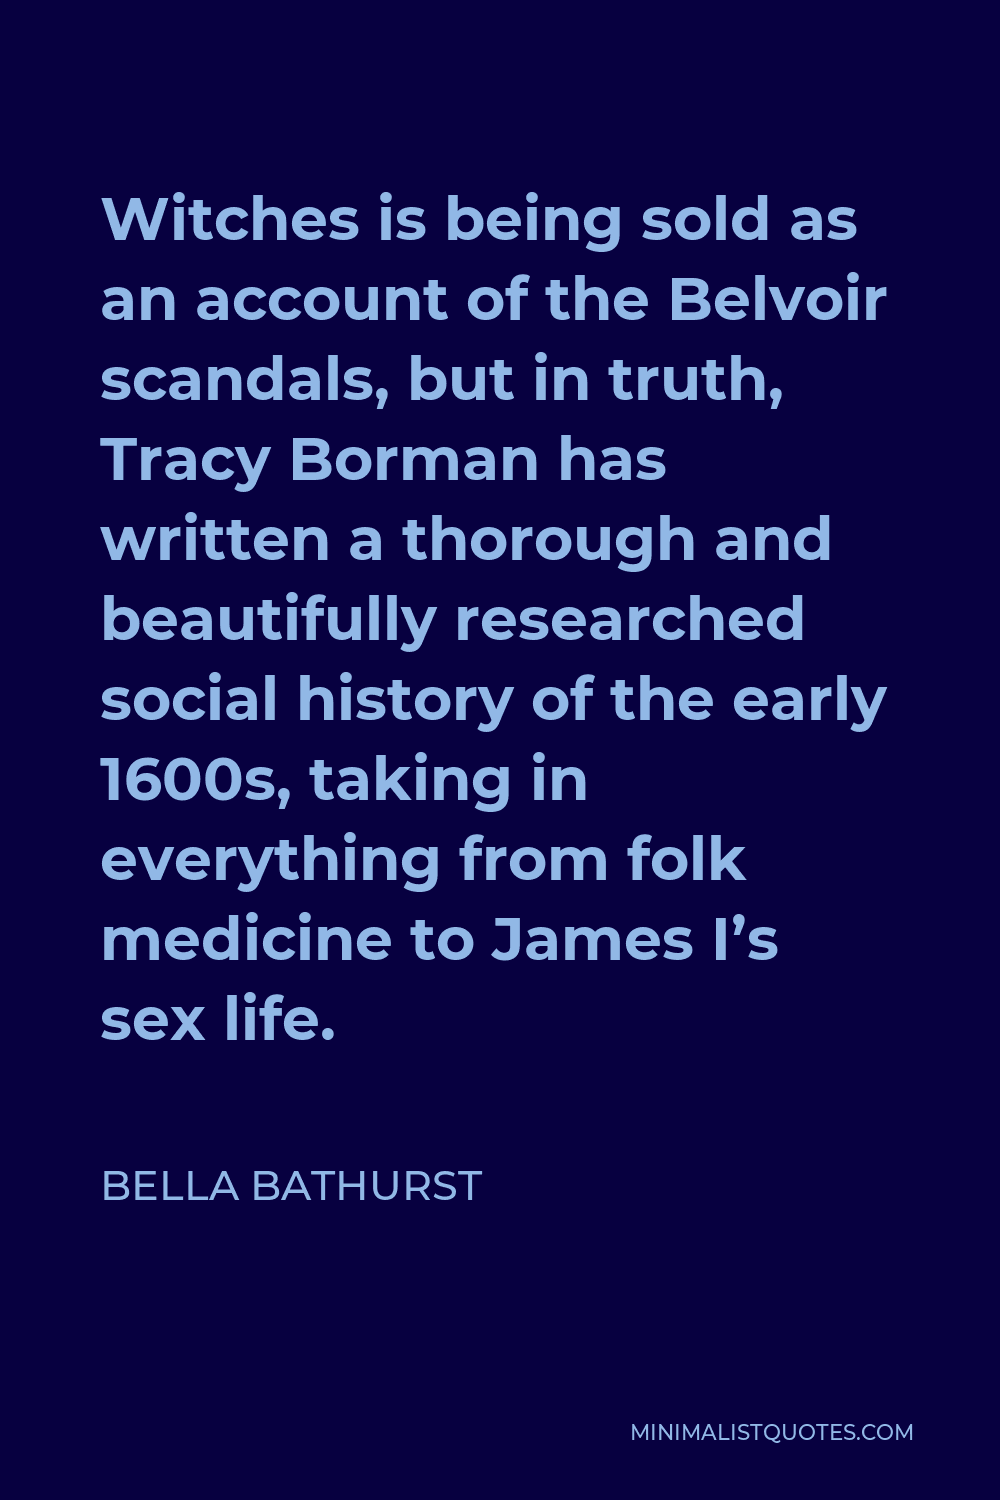 Bella Bathurst Quote - Witches is being sold as an account of the Belvoir scandals, but in truth, Tracy Borman has written a thorough and beautifully researched social history of the early 1600s, taking in everything from folk medicine to James I’s sex life.